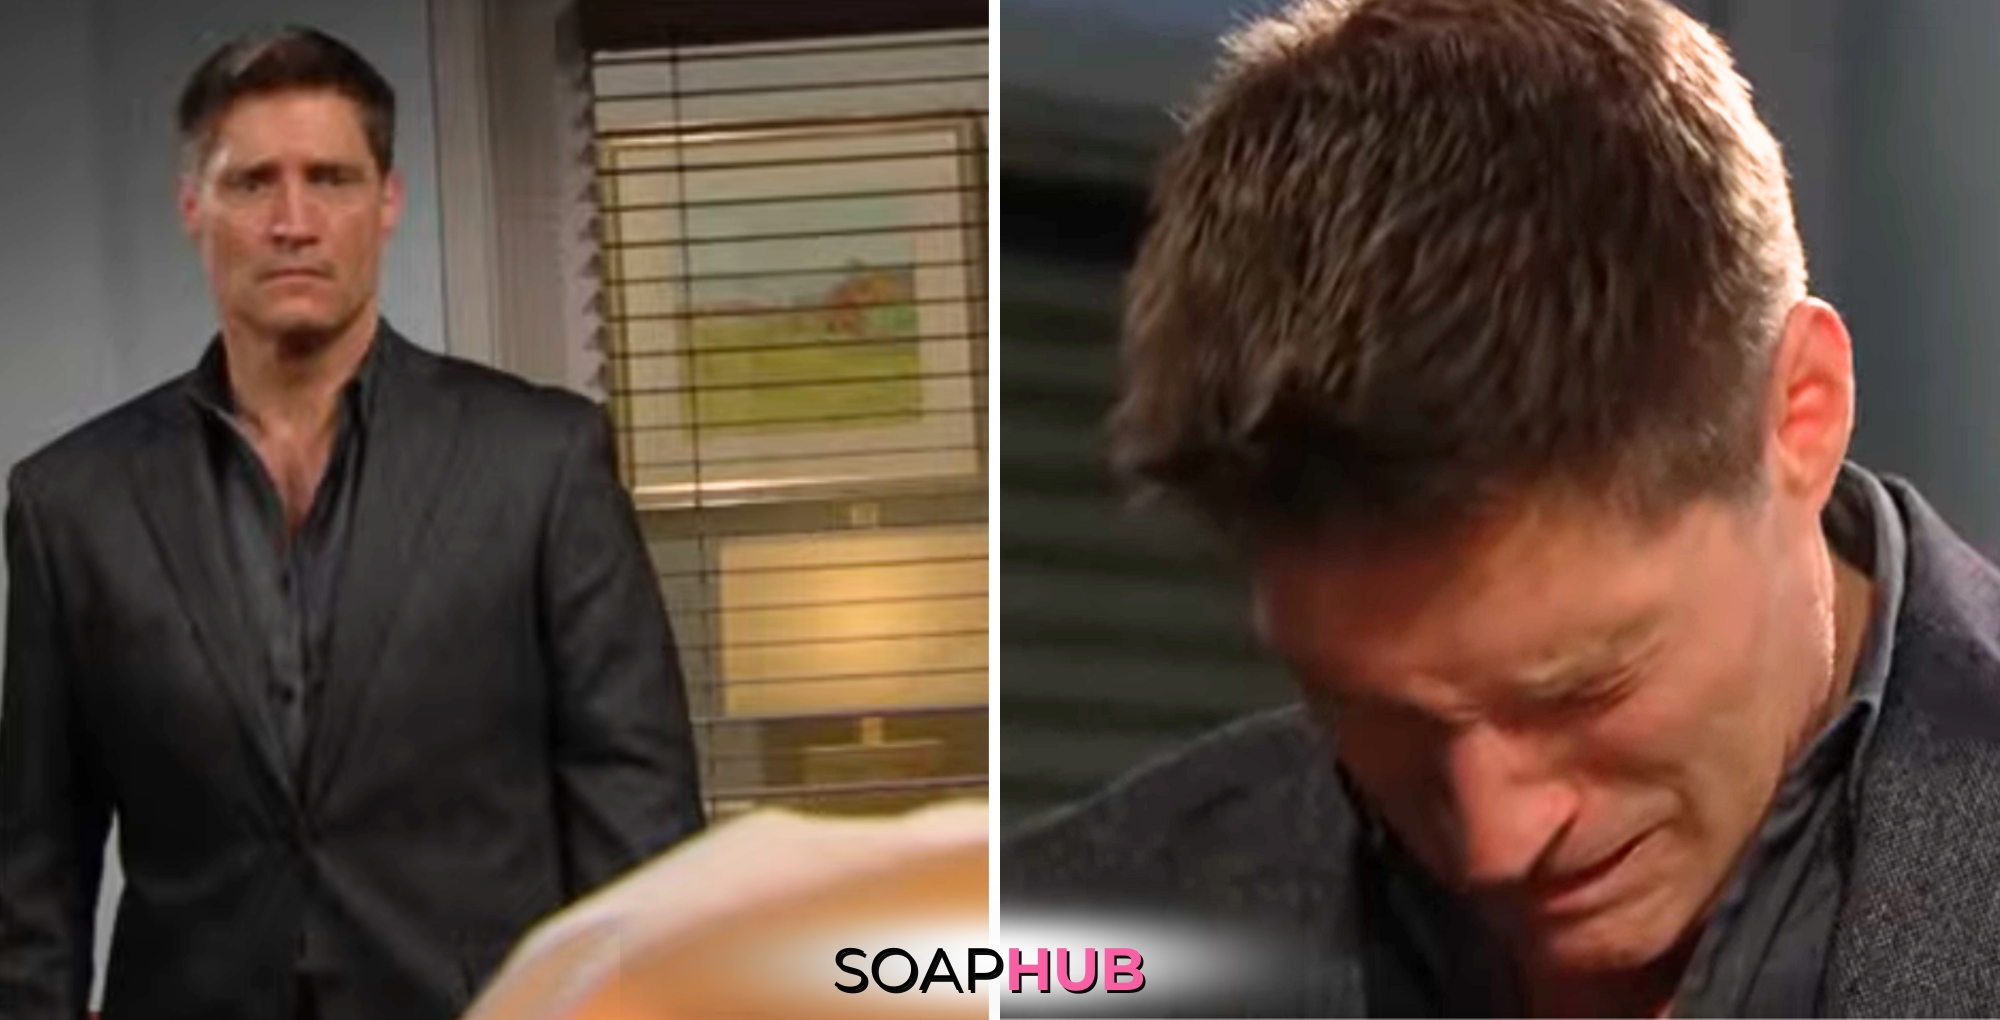 The Bold and the Beautiful spoilers for April 8 feature Deacon with the Soap Hub logo across the bottom.